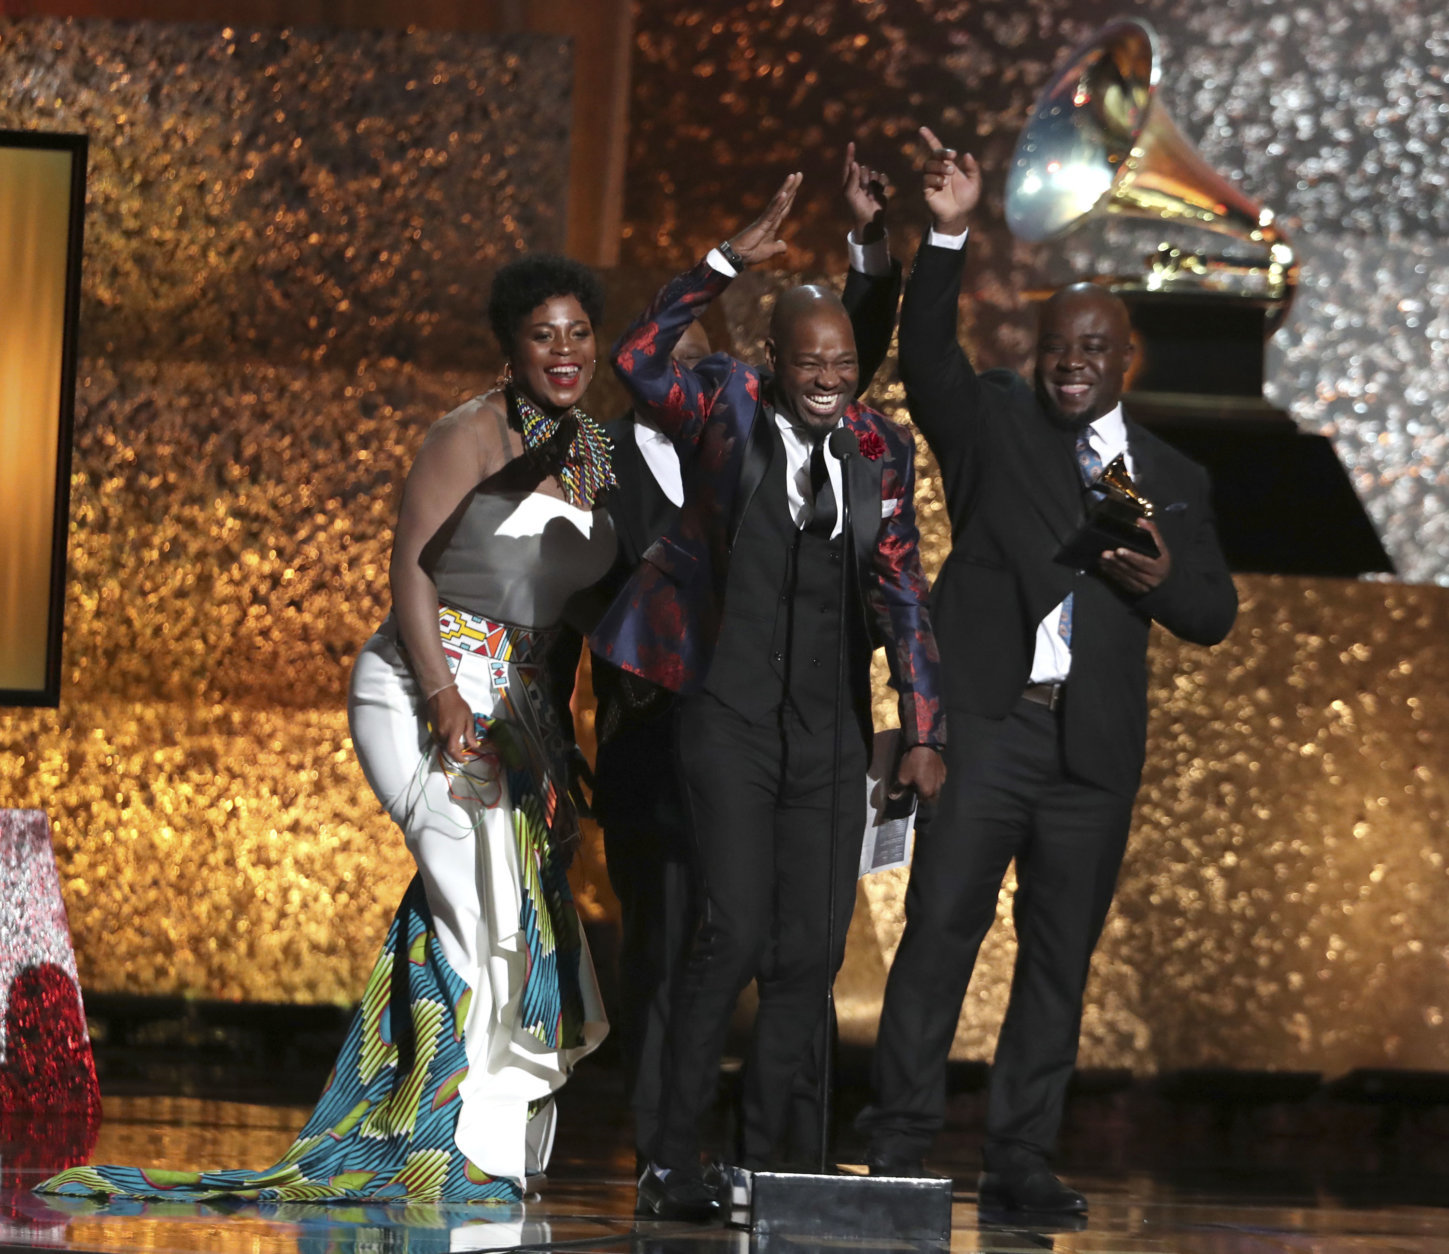 Soweto Gospel Choir accept the award for best world music album for "Freedom" at the 61st annual Grammy Awards on Sunday, Feb. 10, 2019, in Los Angeles. (Photo by Matt Sayles/Invision/AP)